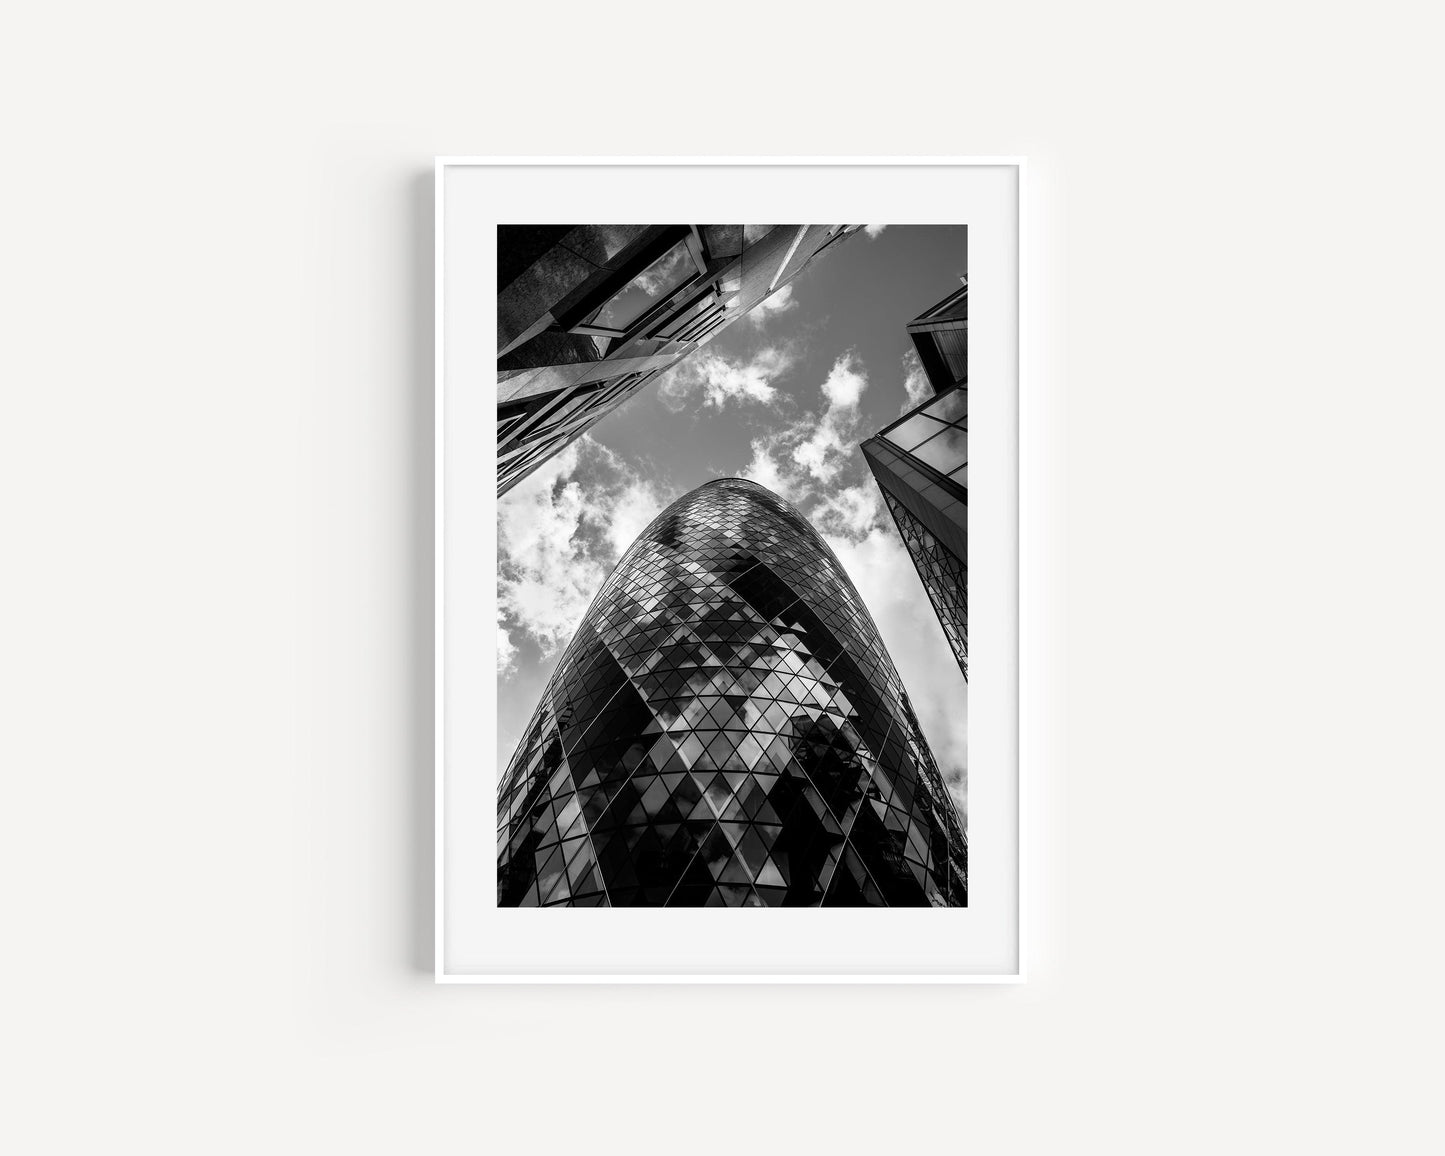 Black and White Gherkin Building Photography Print | London Photography Print - Departures Print Shop